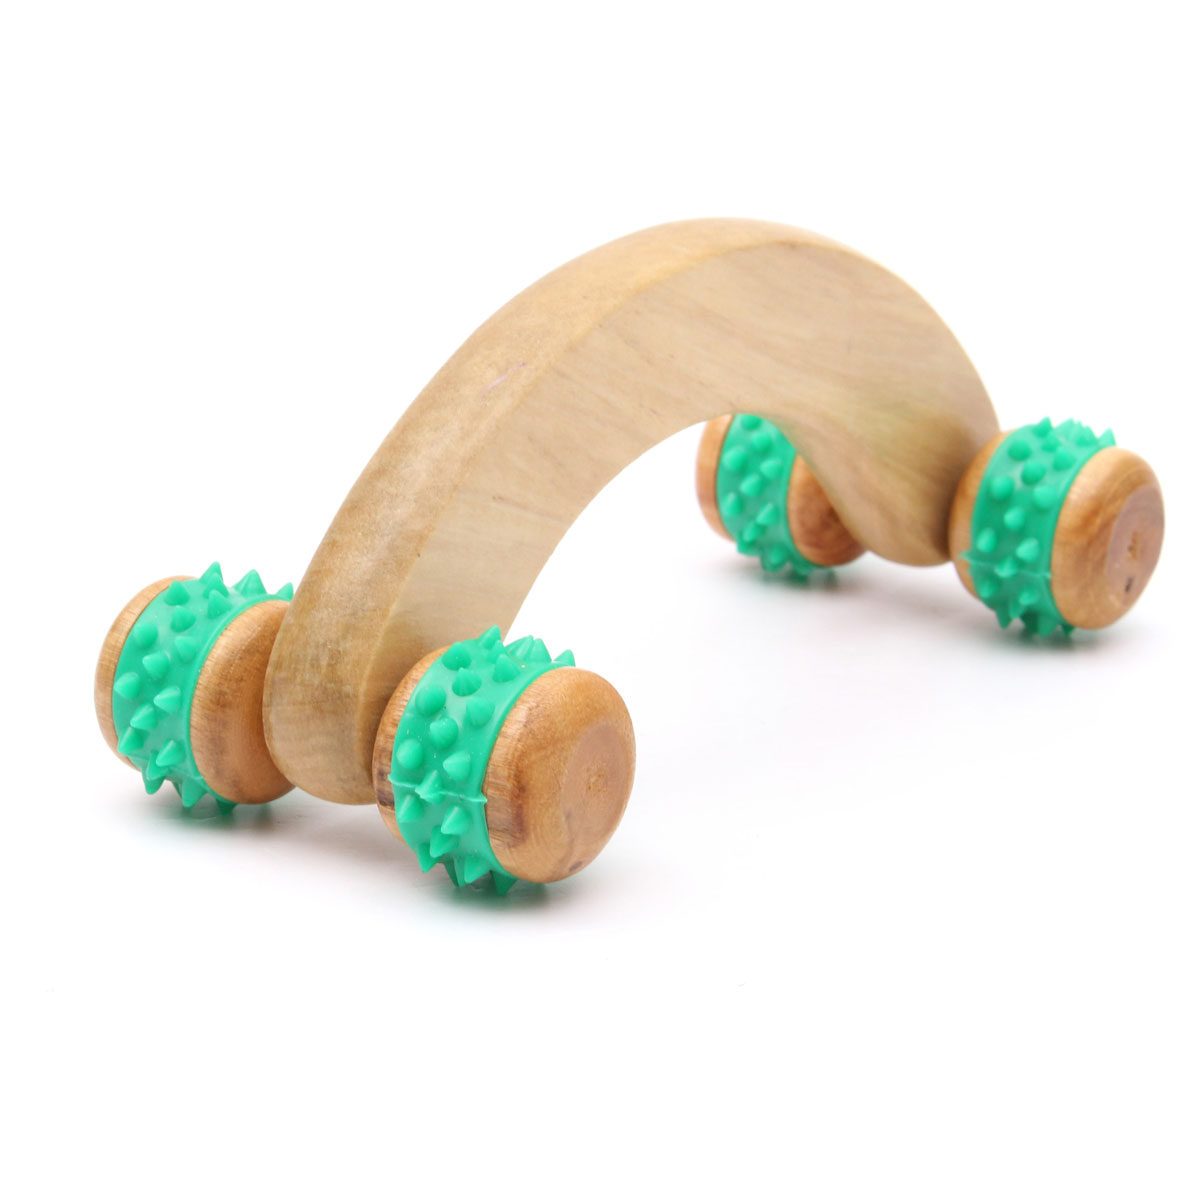 Handheld Wooden Roller Massager Tool Reflexology Hand Foot Back Body Therapy Ebay